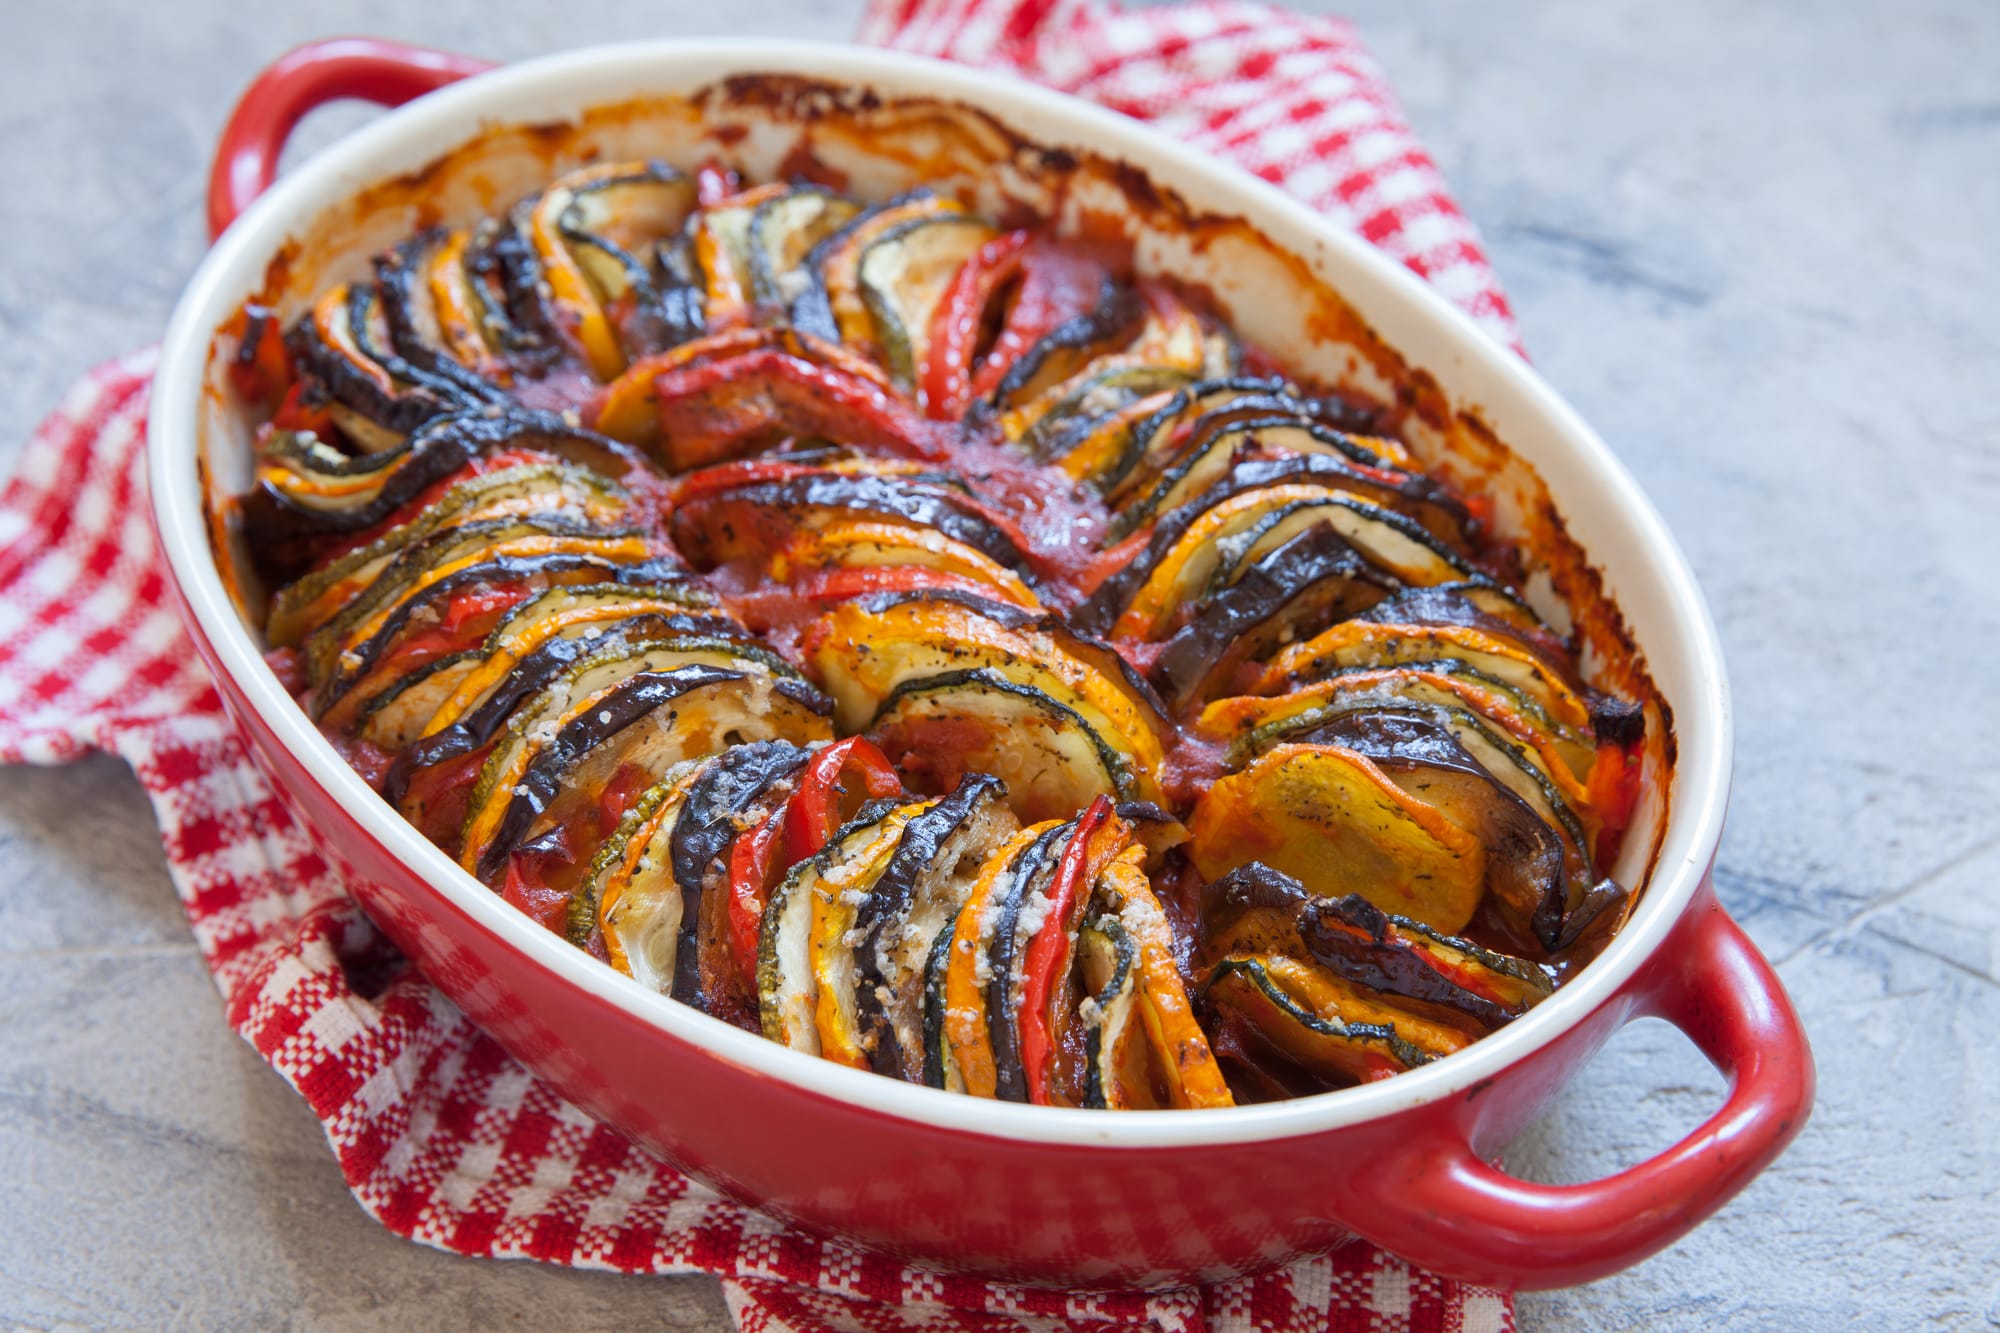 Baked Ratatouille with Pork Sausages